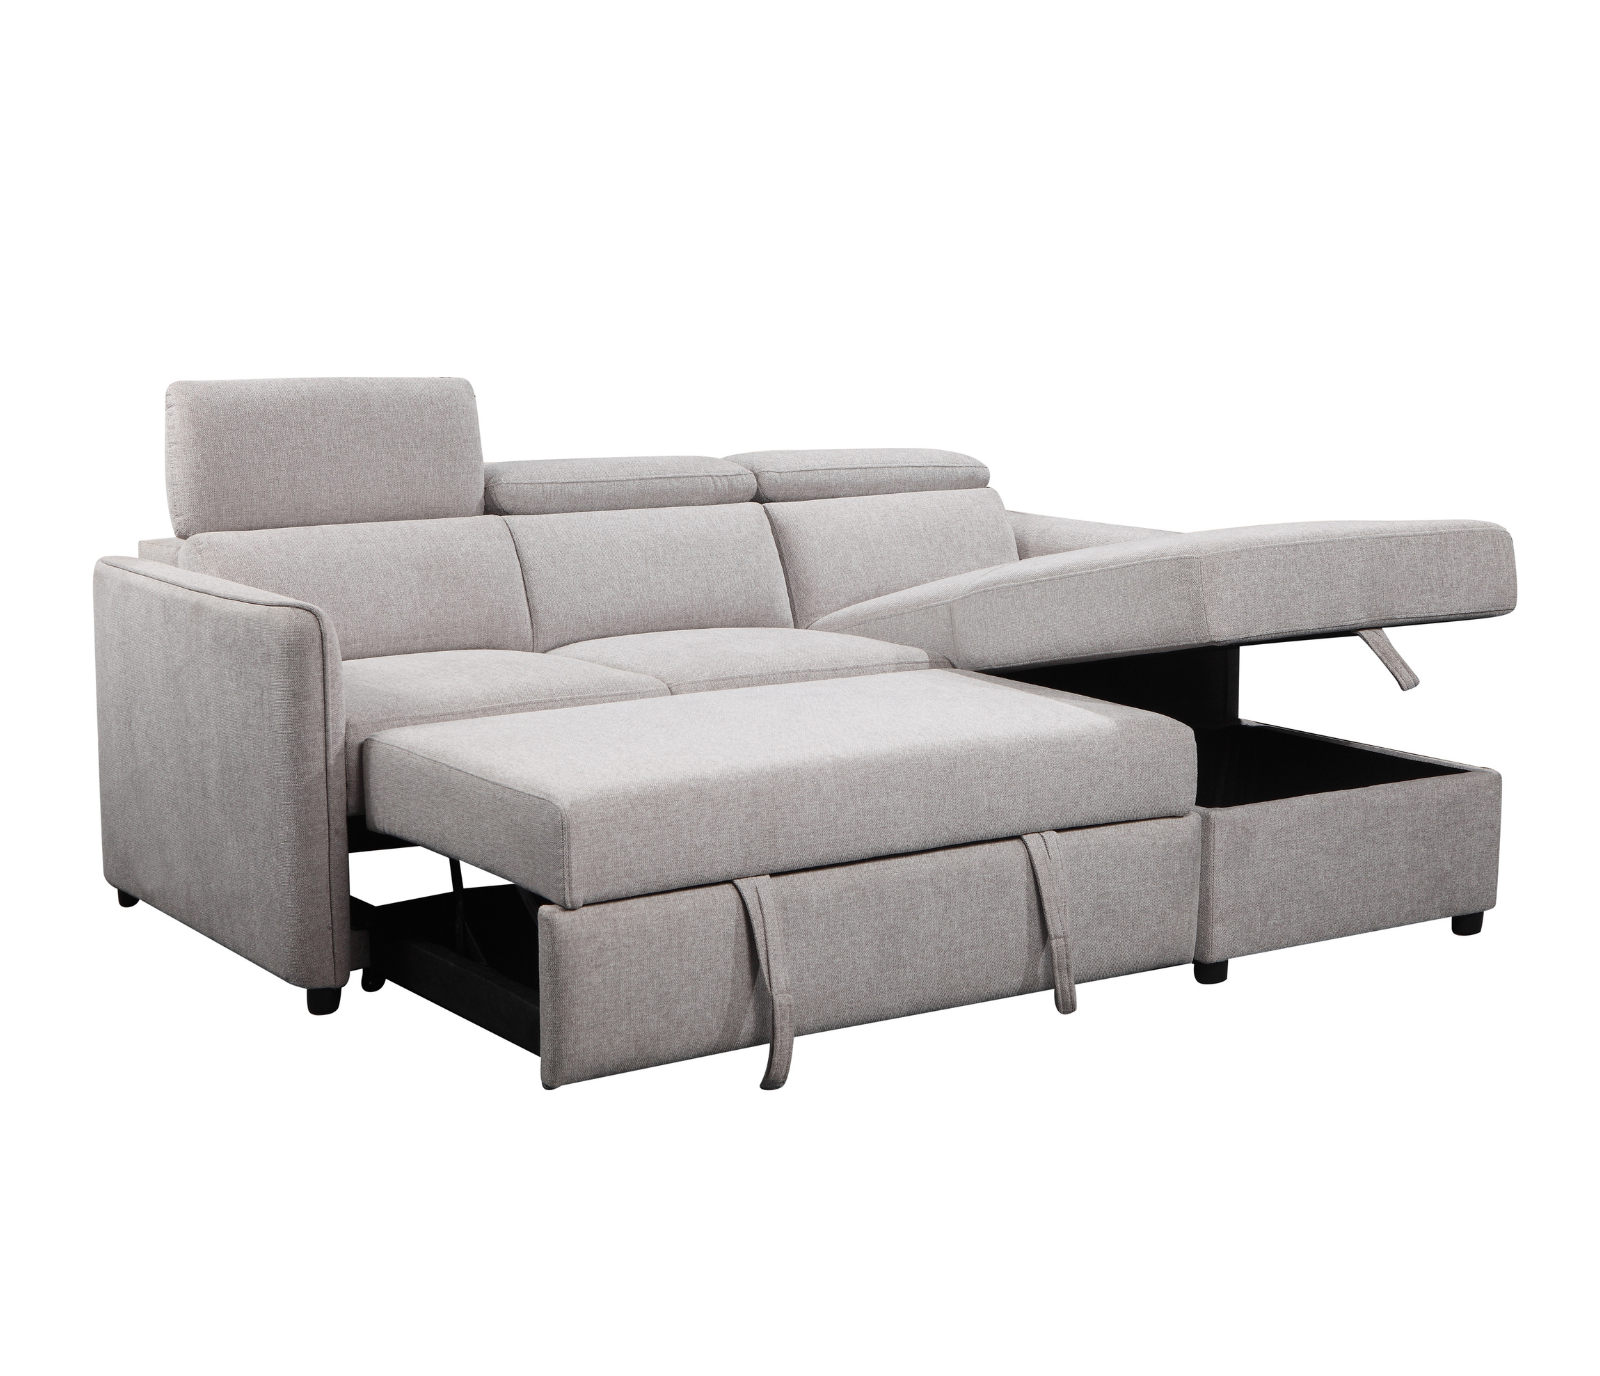 Nico 2 Piece Sectional w/ Pull-Out Sleeper - Light Grey Fabric